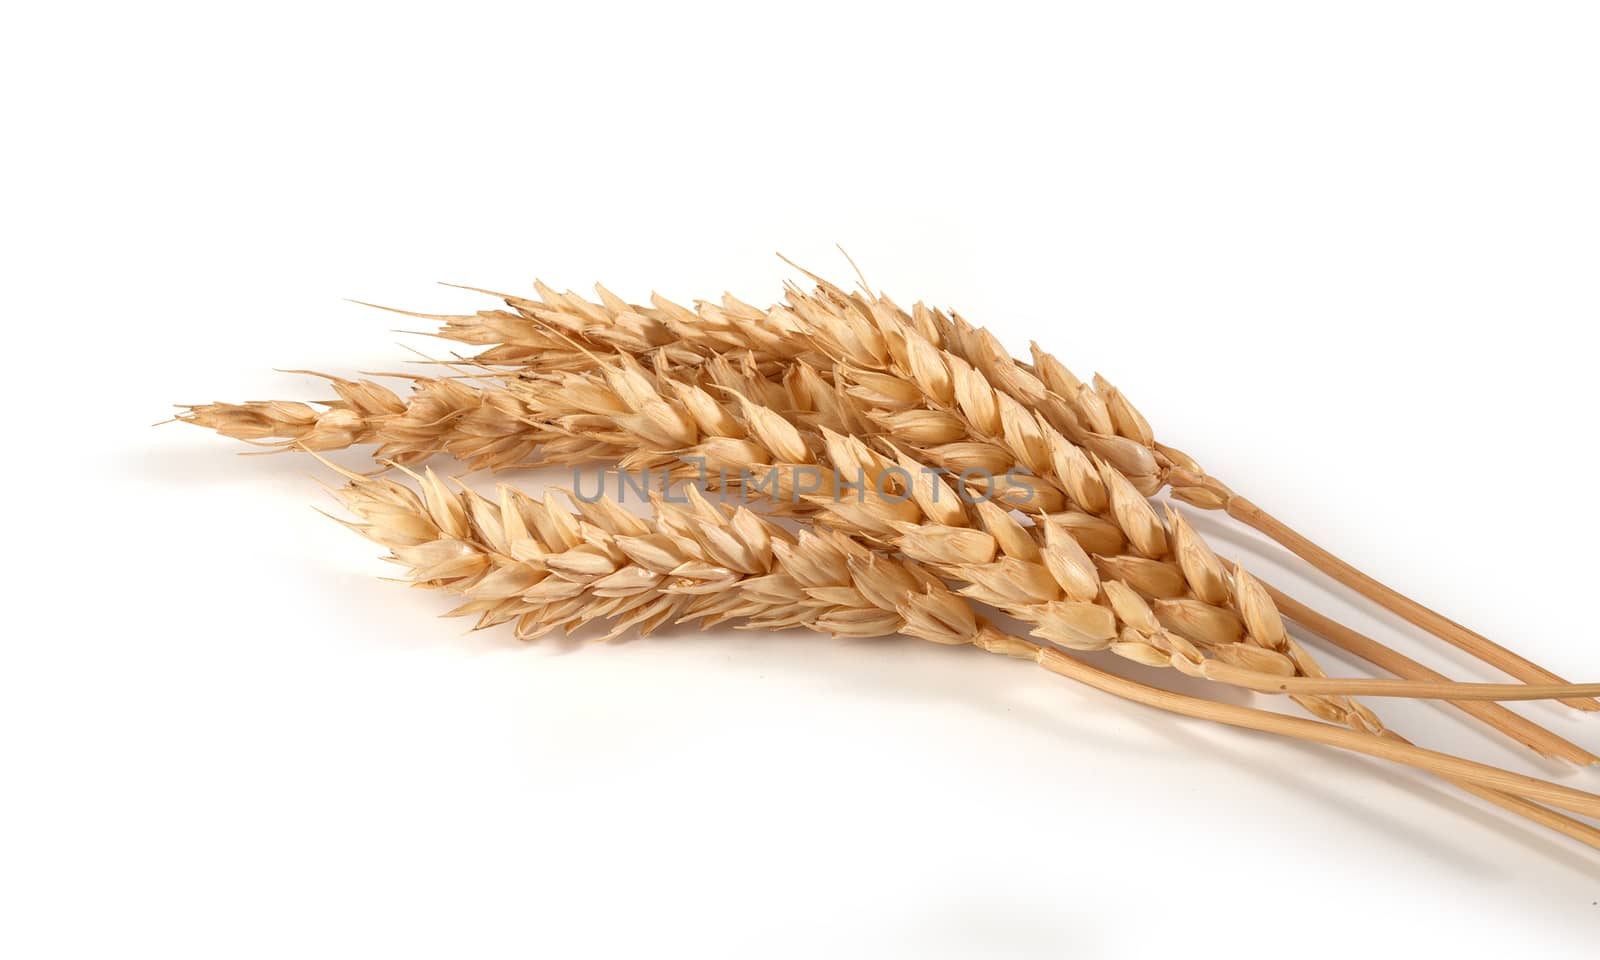 Some spikelets of wheat by Angorius